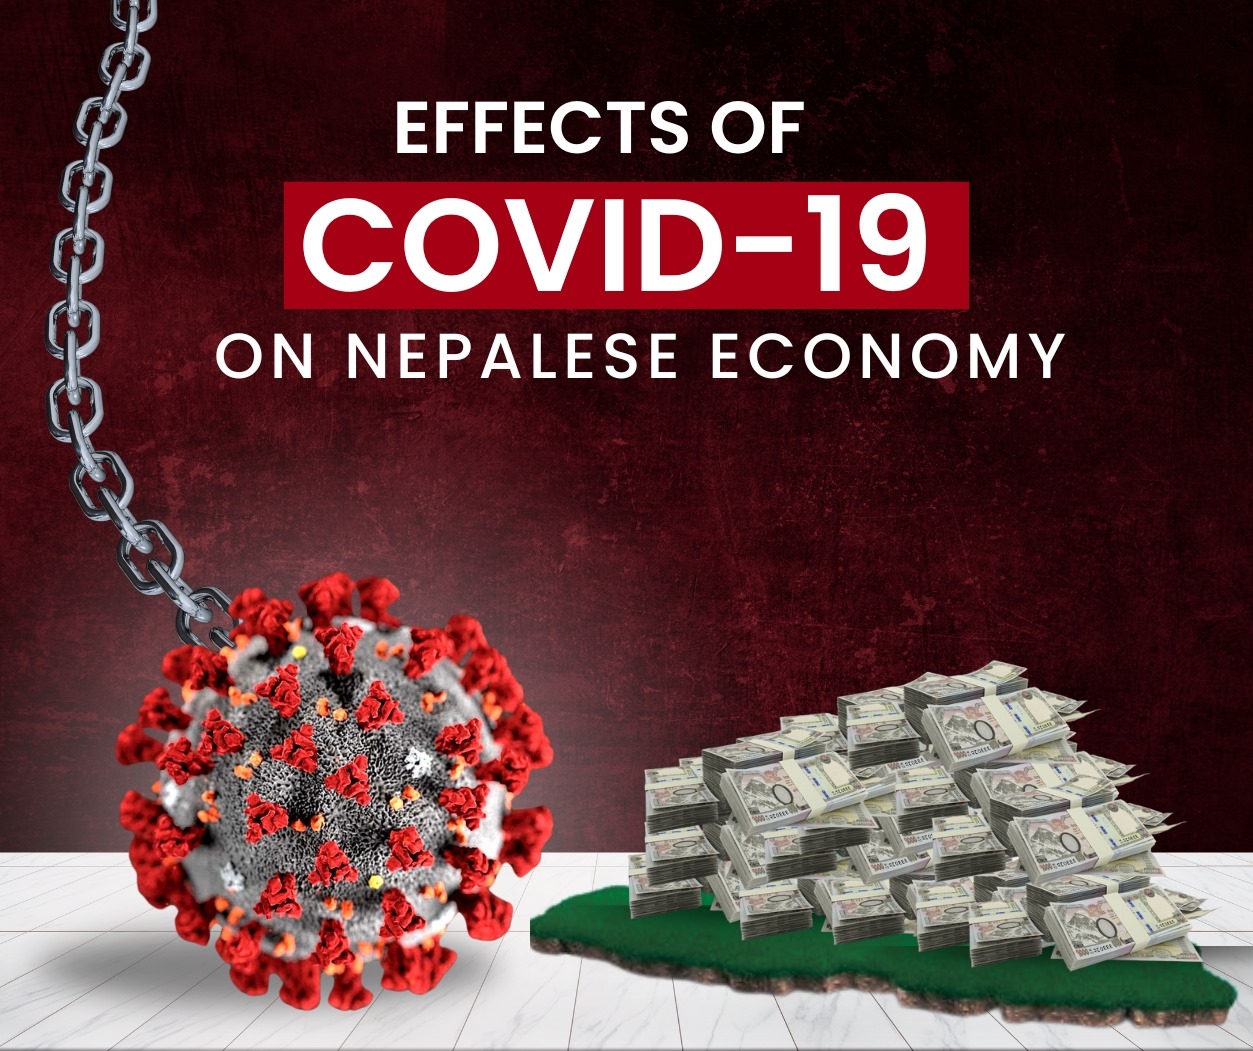 Effects of Covid-19 on Nepalese Economy